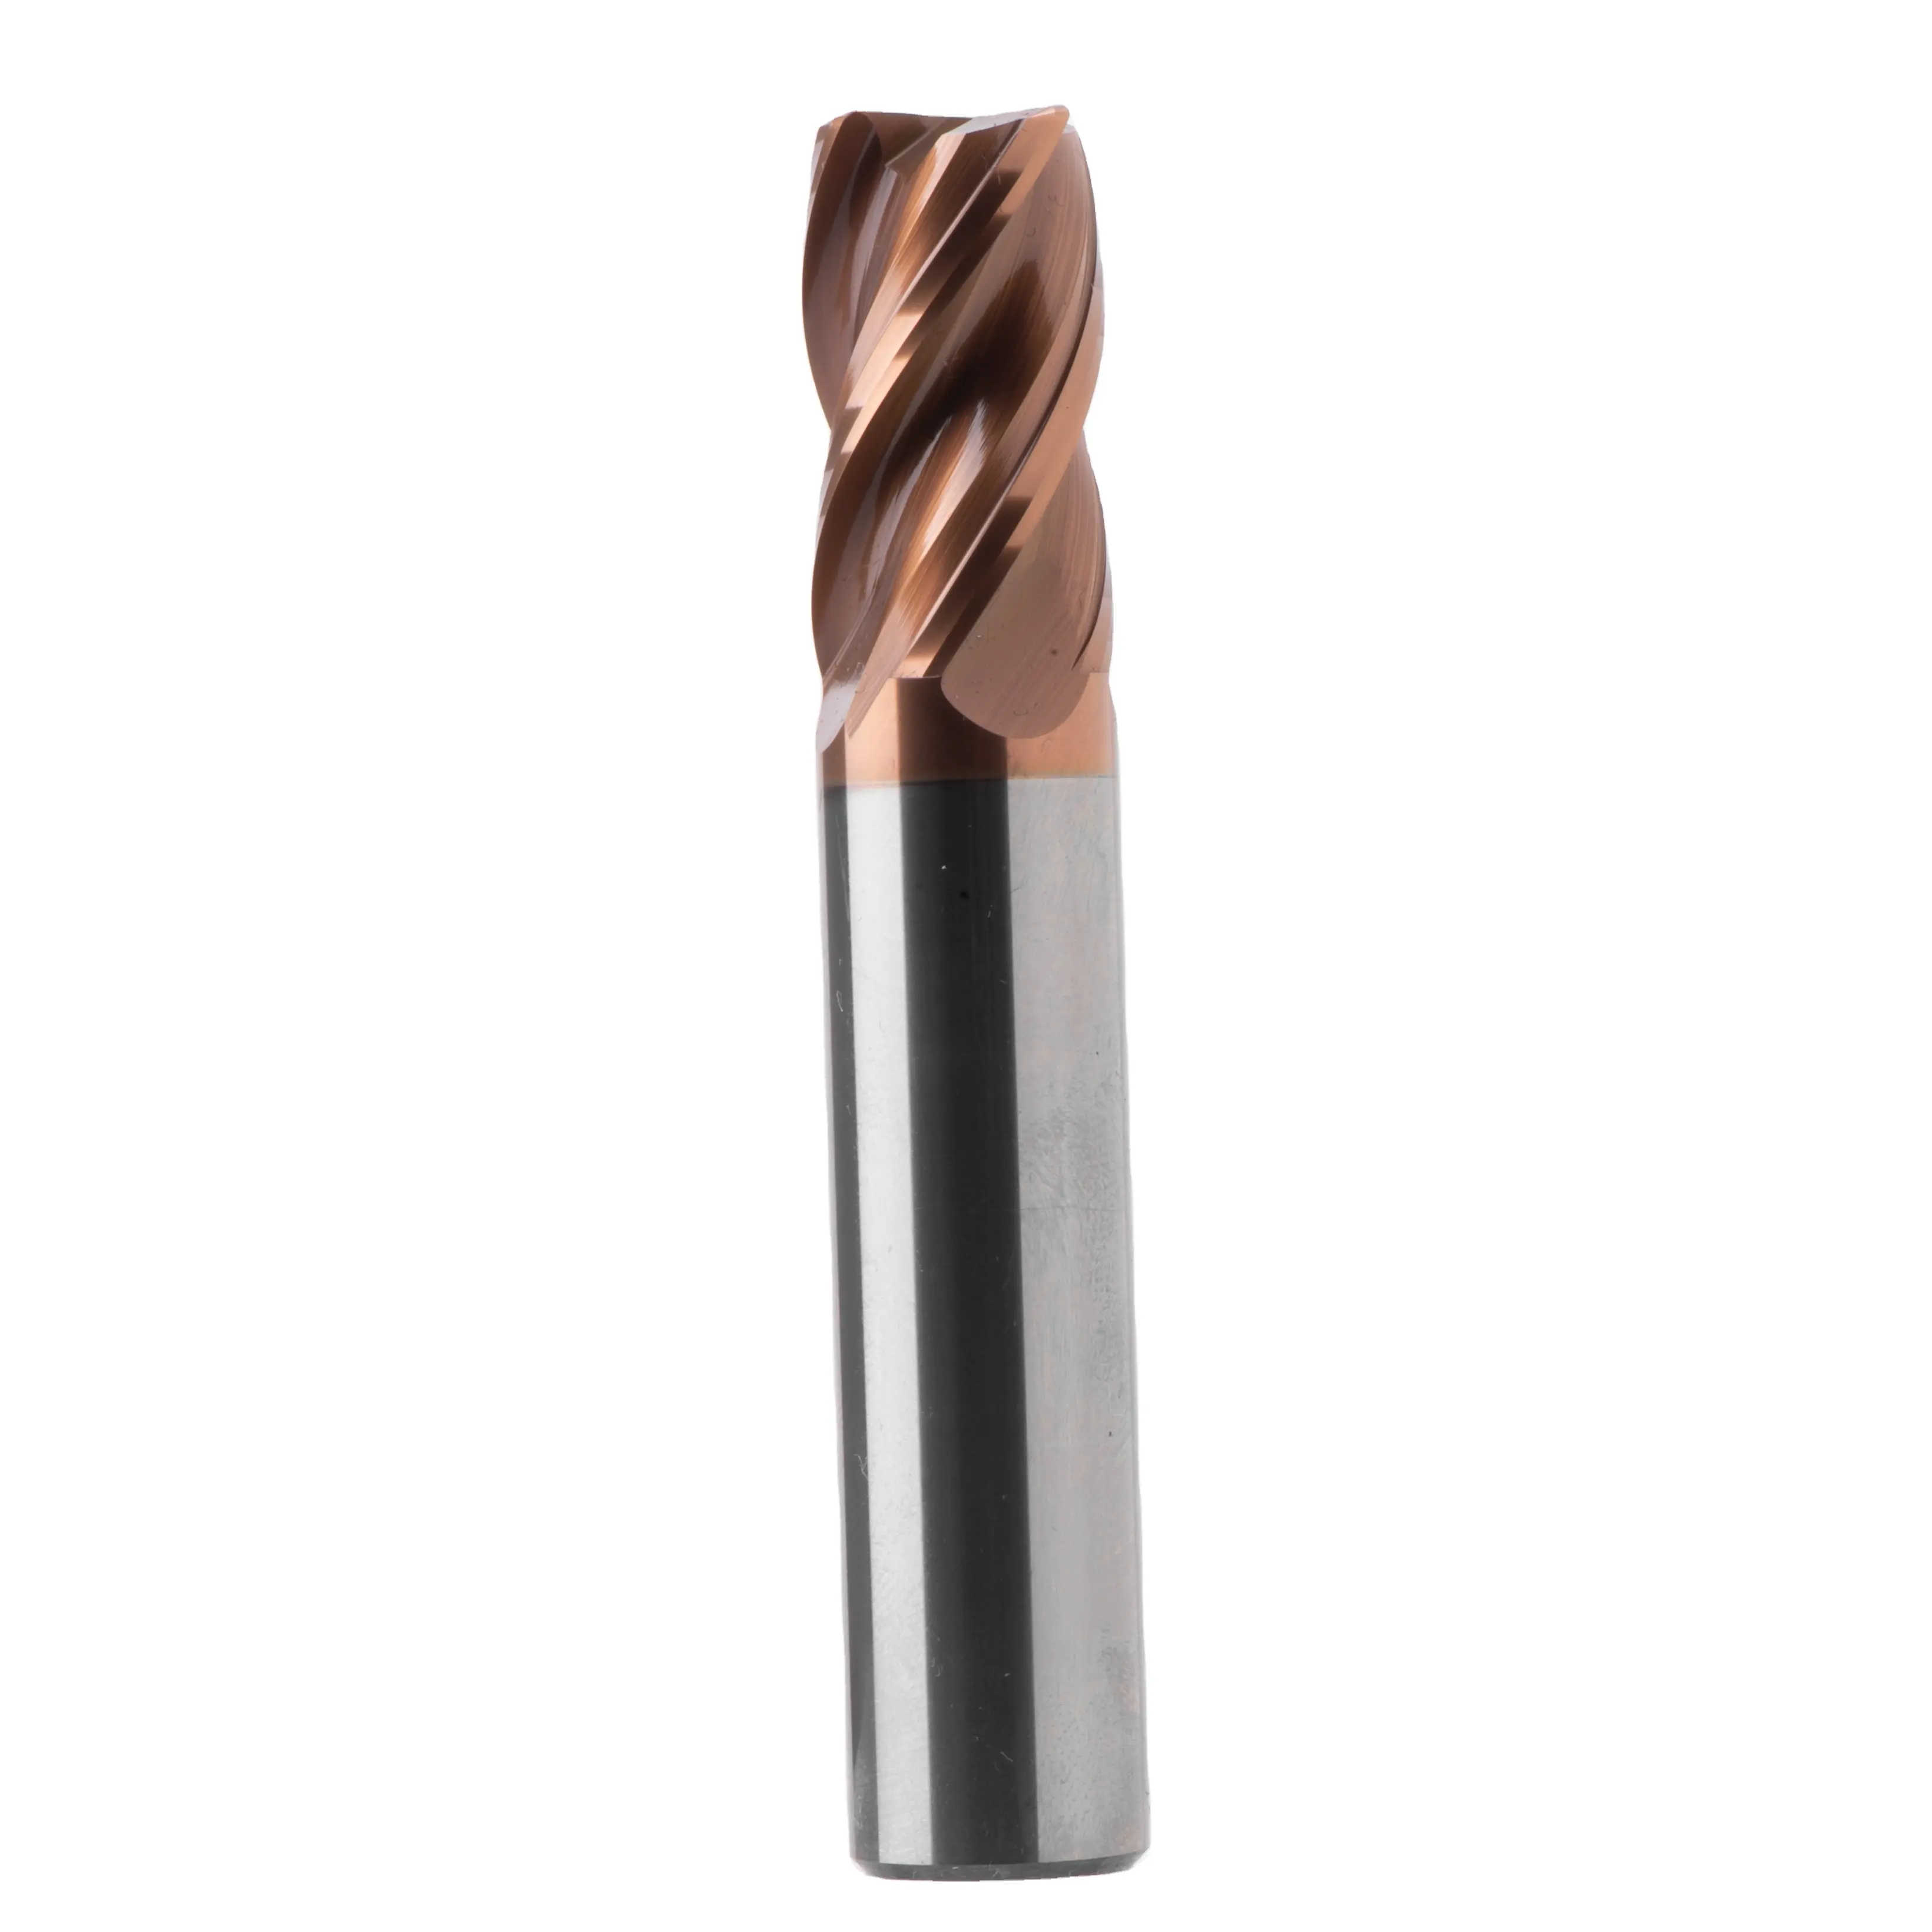 Tungsten Face Mill HRC65 Four Flutes End Mills CNC Milling Machining Metal Cutting Carbide Flat End Milling Cutter